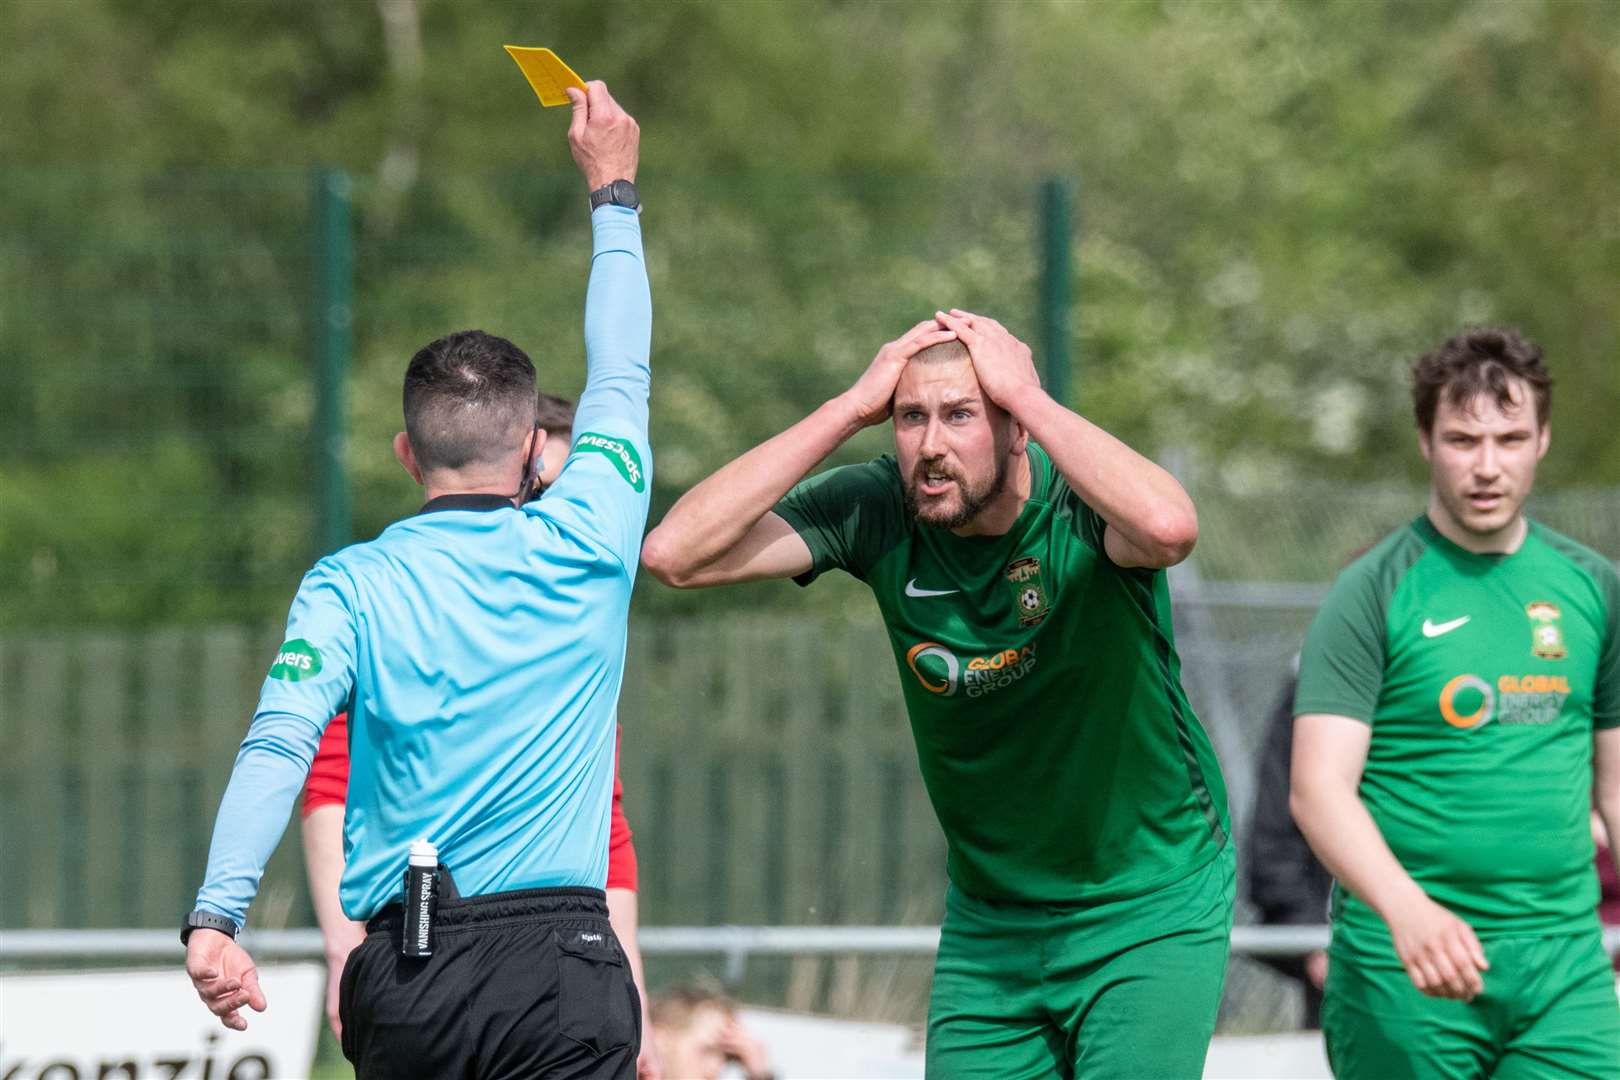 Michael Dunn cannot believe referee Kevin Buchanan's decision as he awards a free kick to Forres and books the Dufftown centre half. ..Dufftown FC (2) vs Forres Thistle FC (2) - Dufftown FC win 5-3 on penalties - Elginshire Cup Final held at Logie Park, Forres 14/05/2022...Picture: Daniel Forsyth..